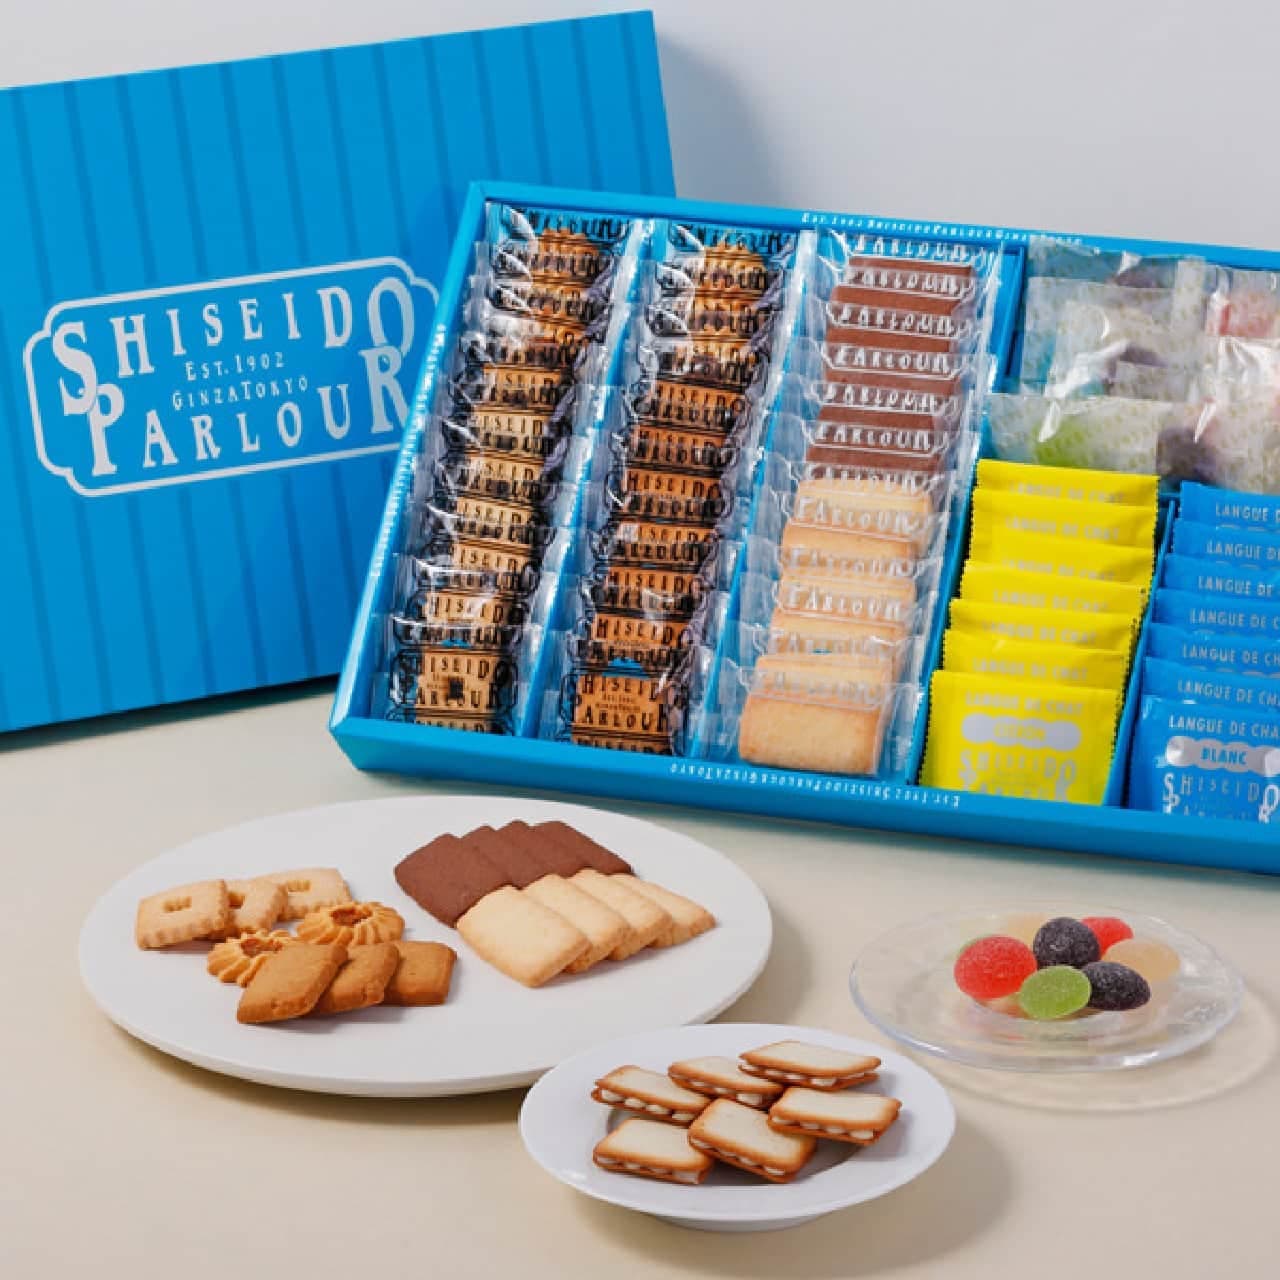 A collection of fashionable sweets and food gifts available at Shiseido Parlor!